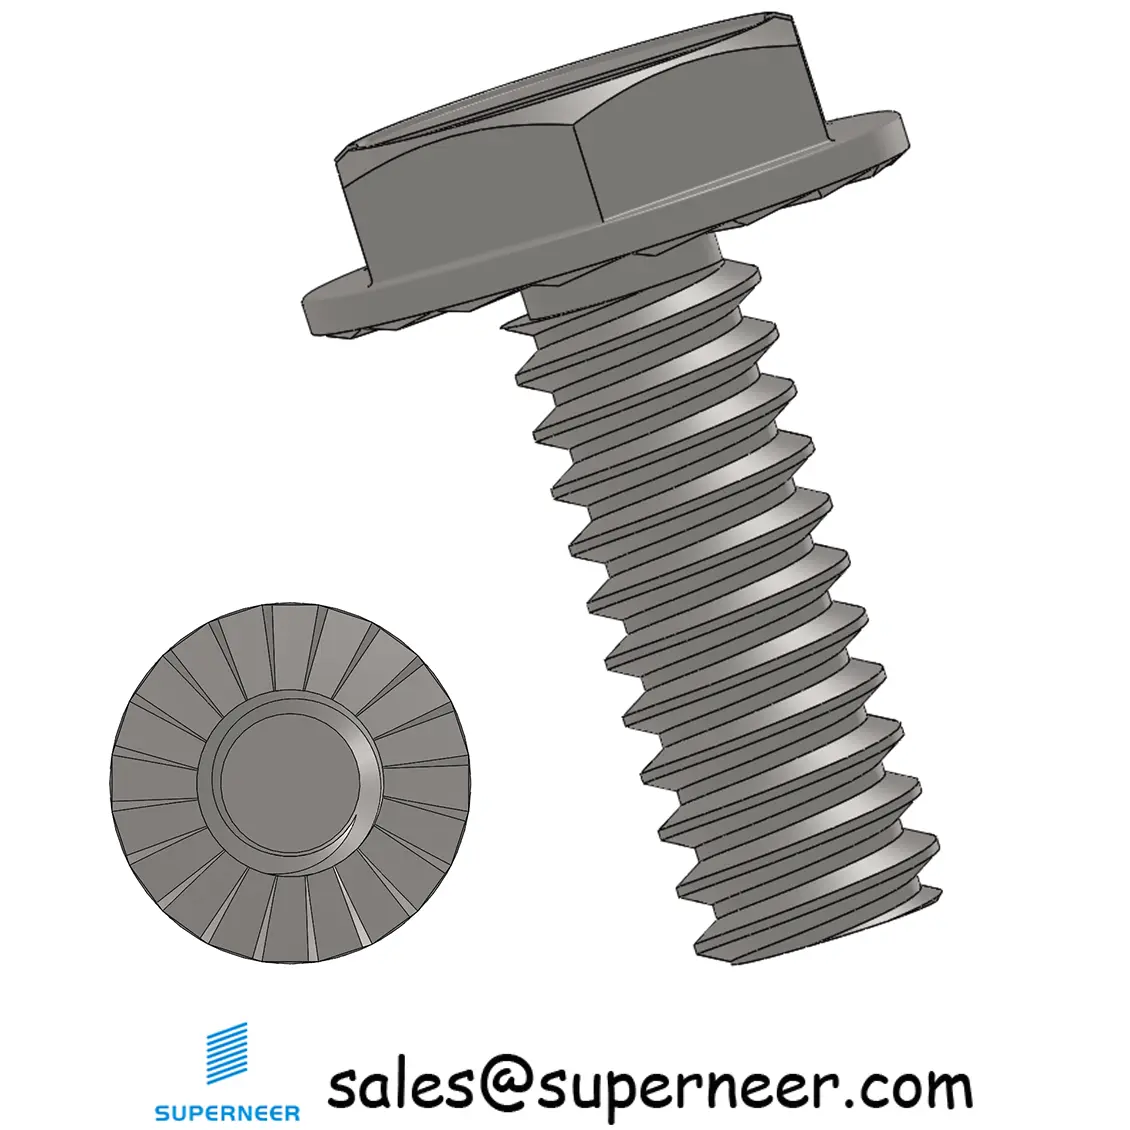 6-32 x 3/8" Indented Hex Washer Serrated Head Slotted Machine Screw SUS304 Stainless Steel Inox